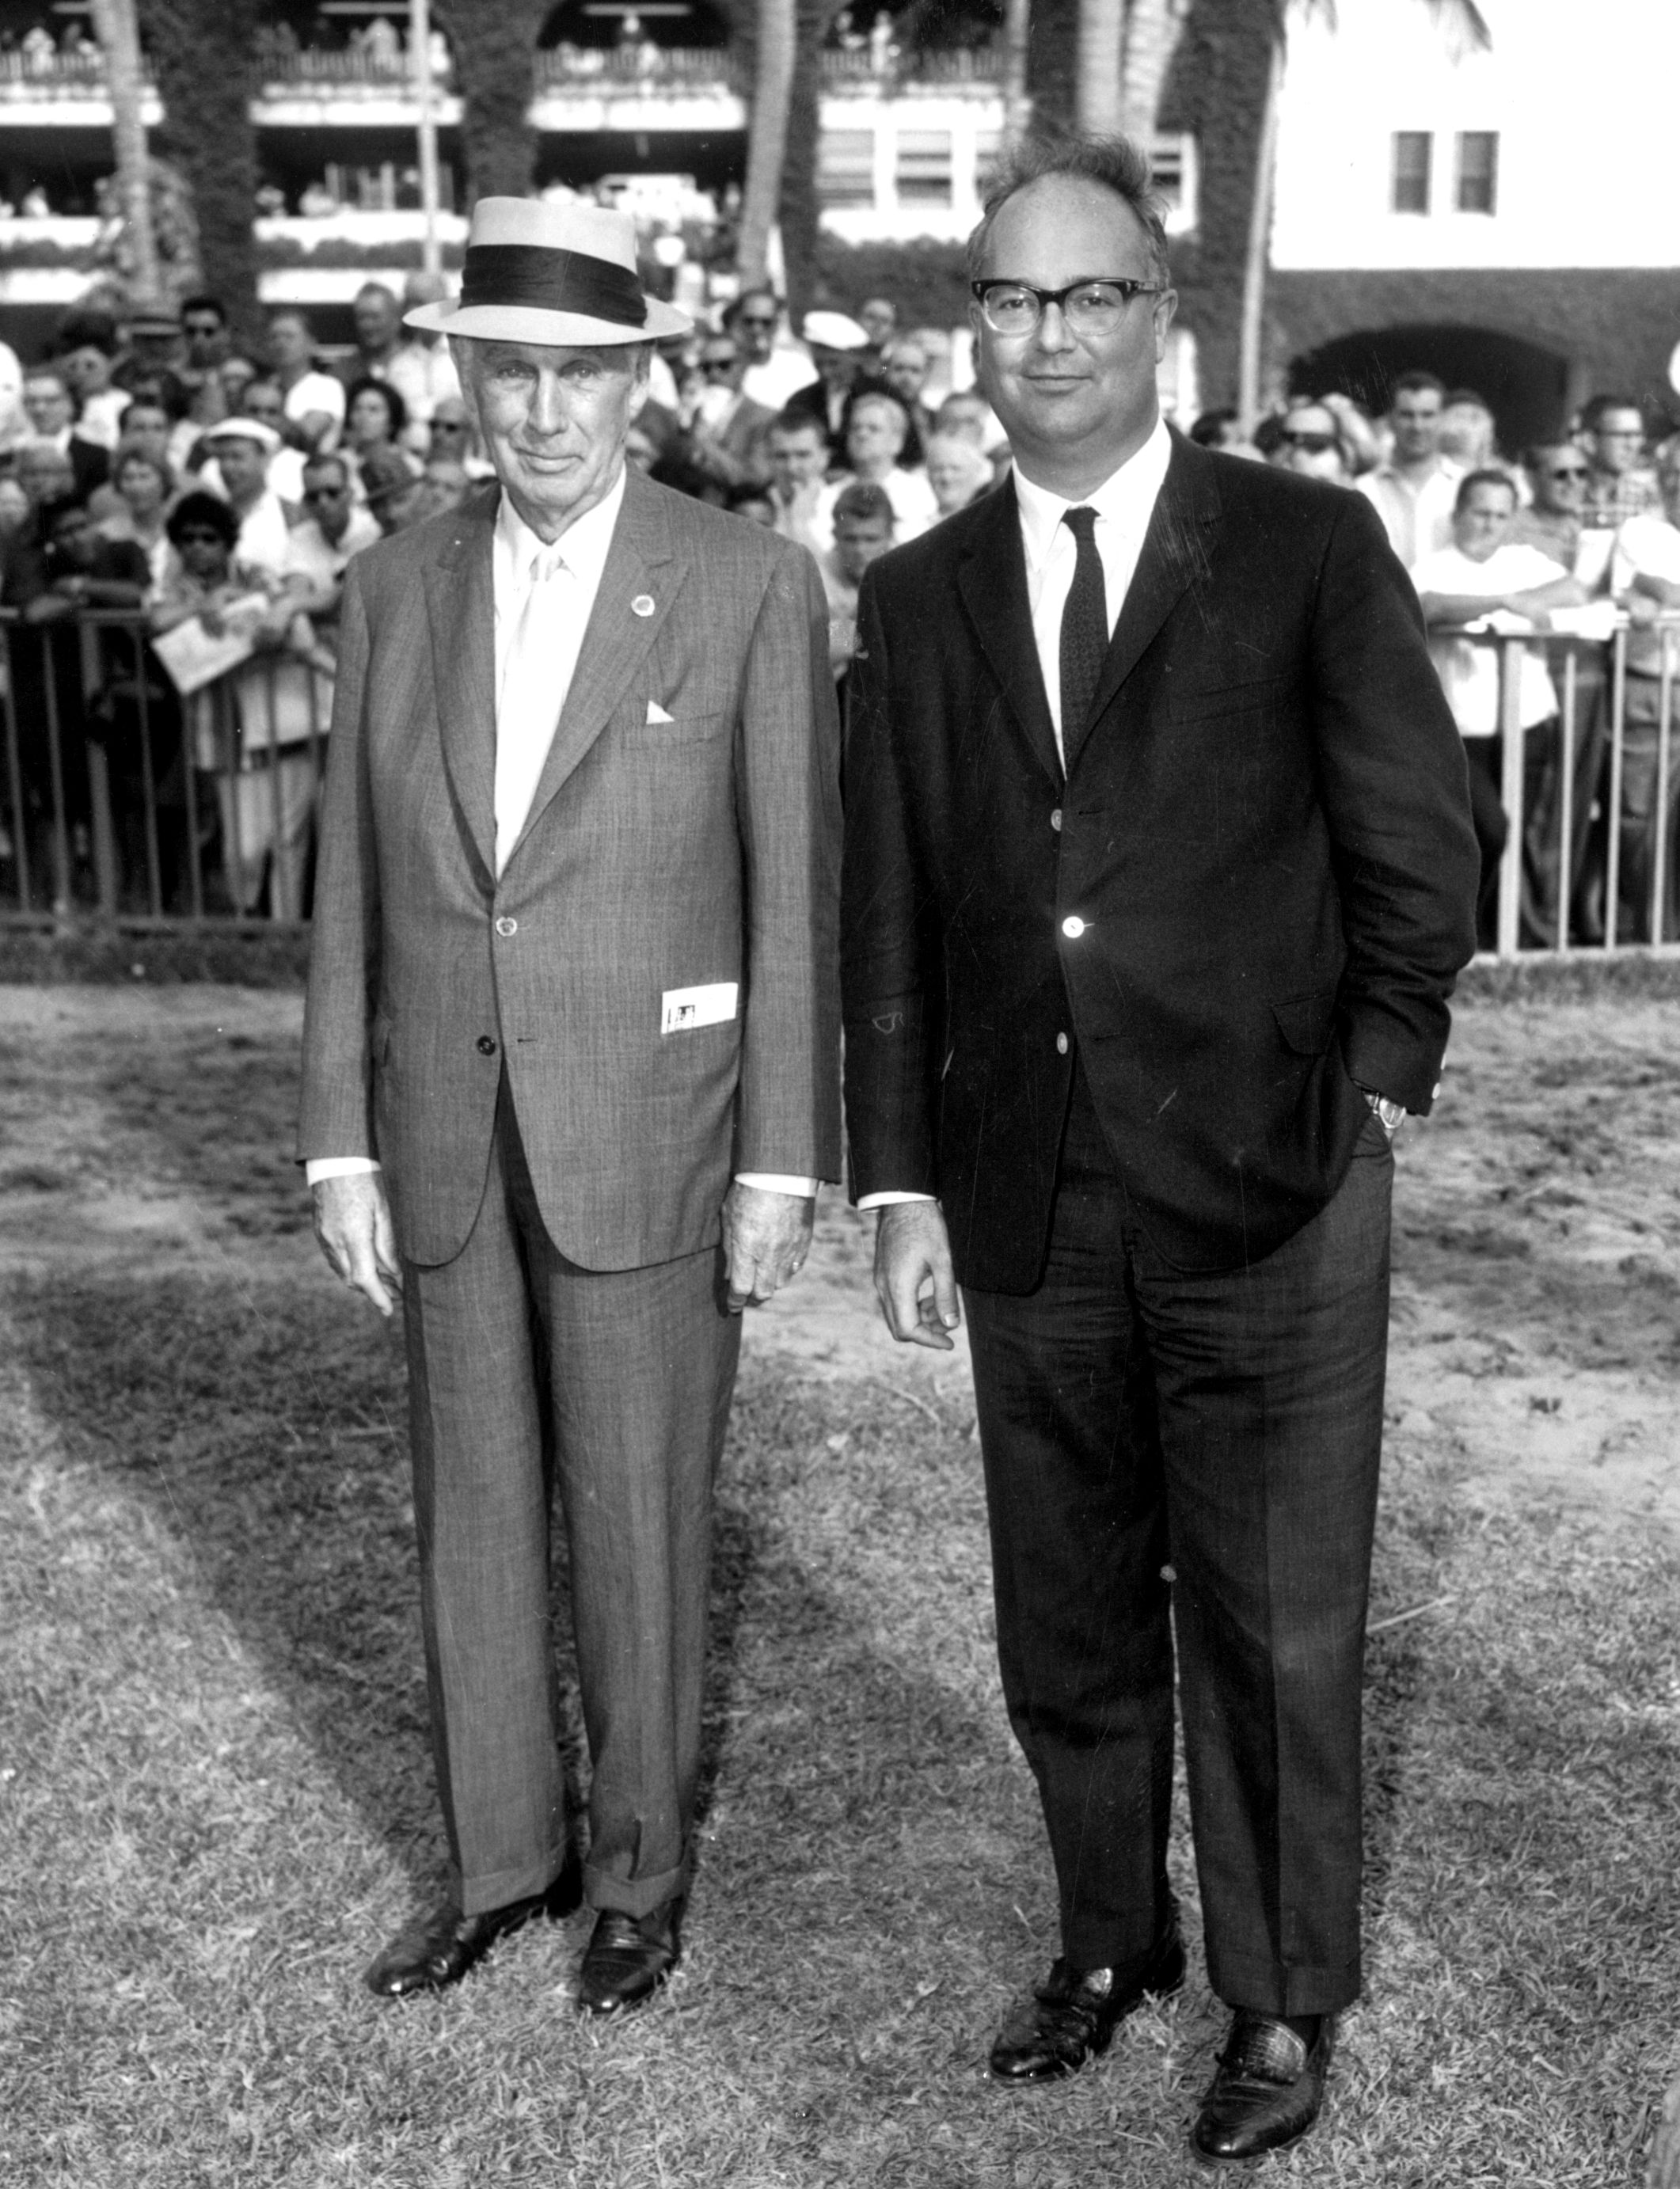 George D. Widener, Jr. and Peter A. B. Widener III in the paddock at Hialeah Park (Keeneland Library Morgan Collection)